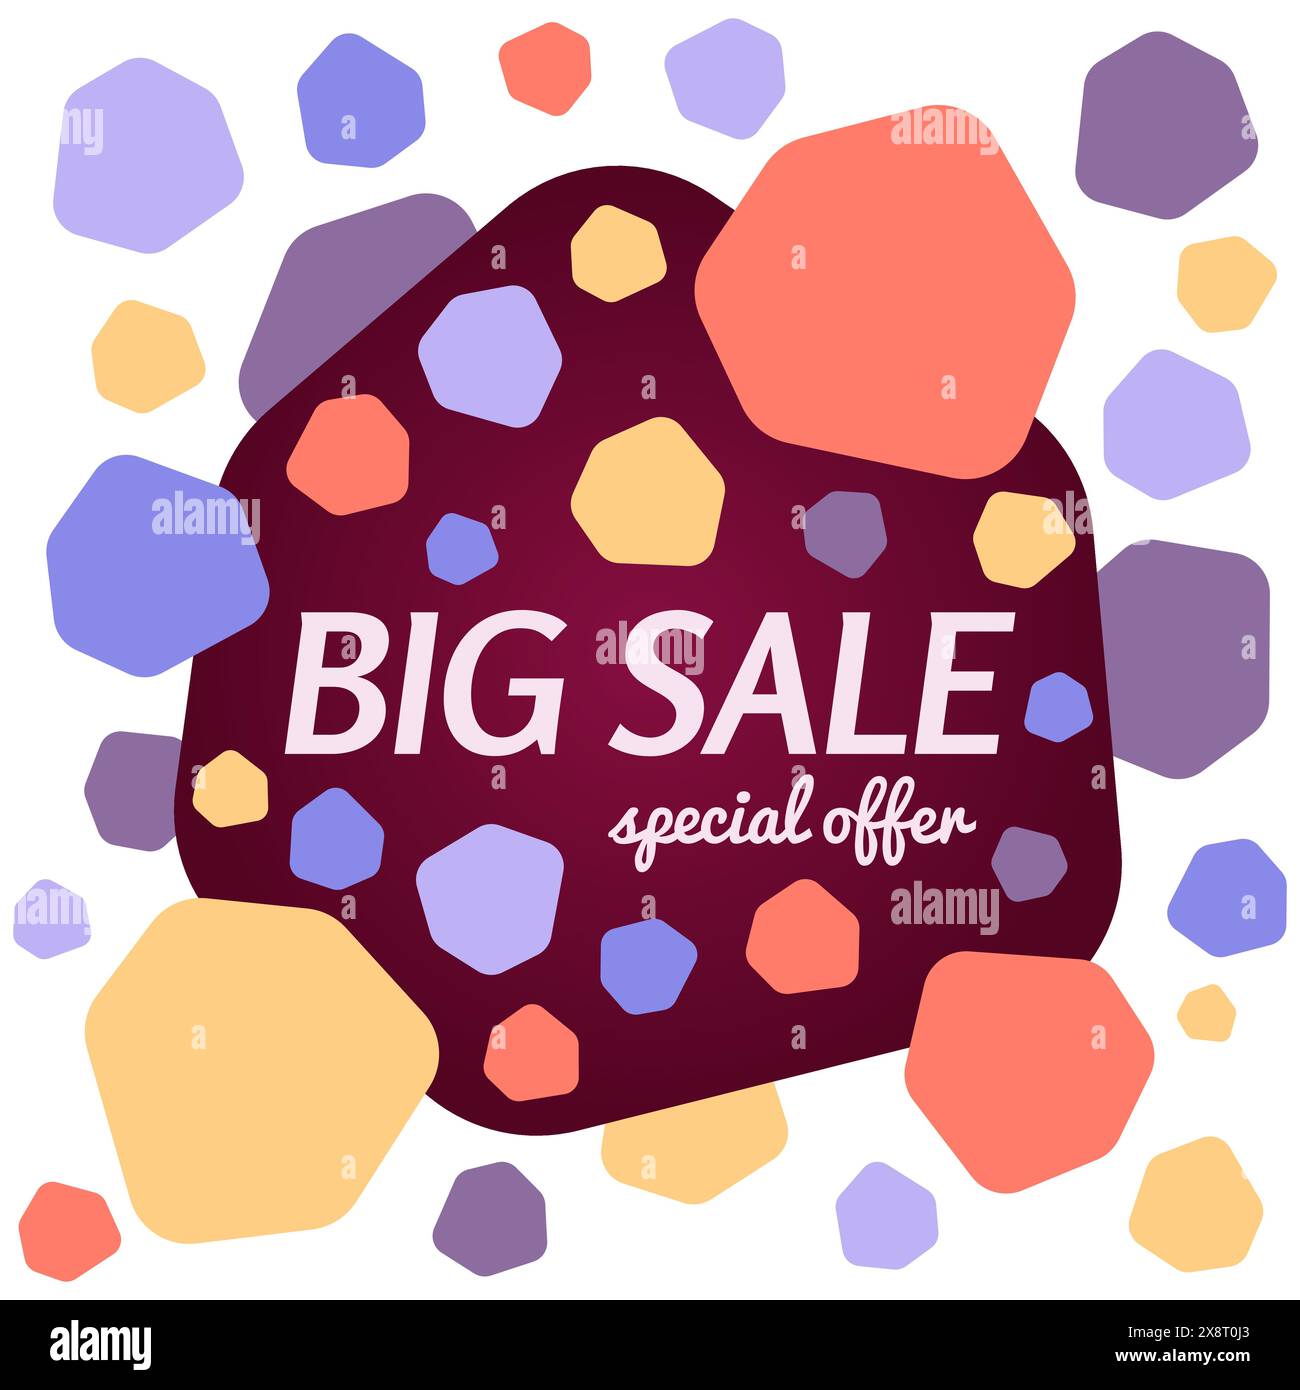 Big sale special offer banner on white background.  Vector background with colorful design elements. Vector illustration. Stock Vector